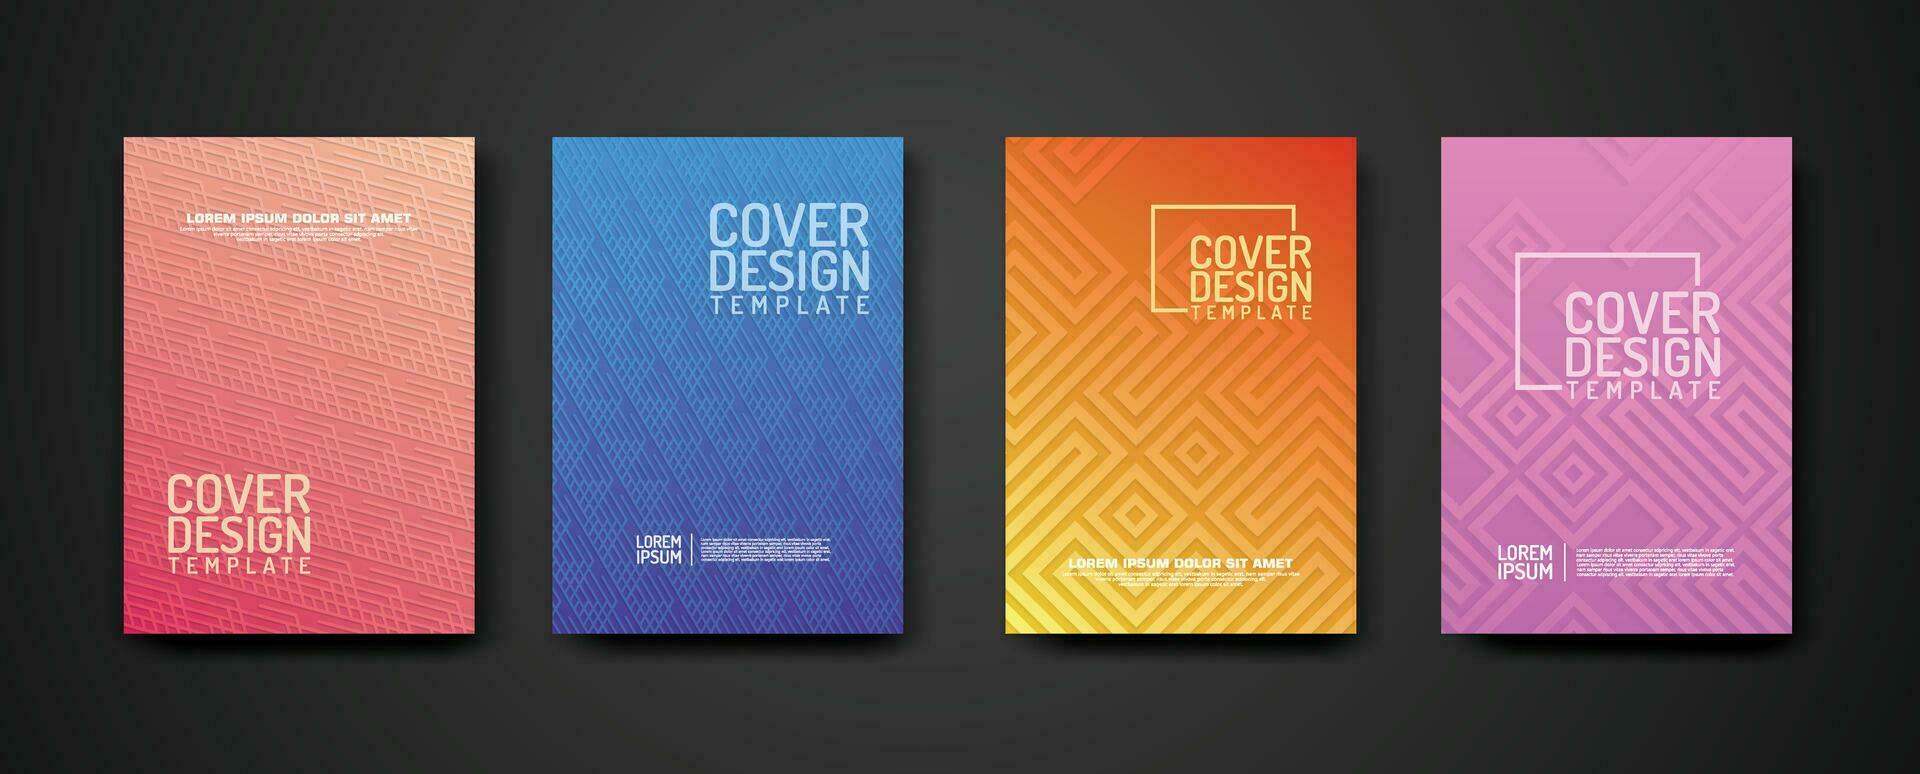 set cover Design template  with geometric lines textured pattern background and dynamic gradation color vector